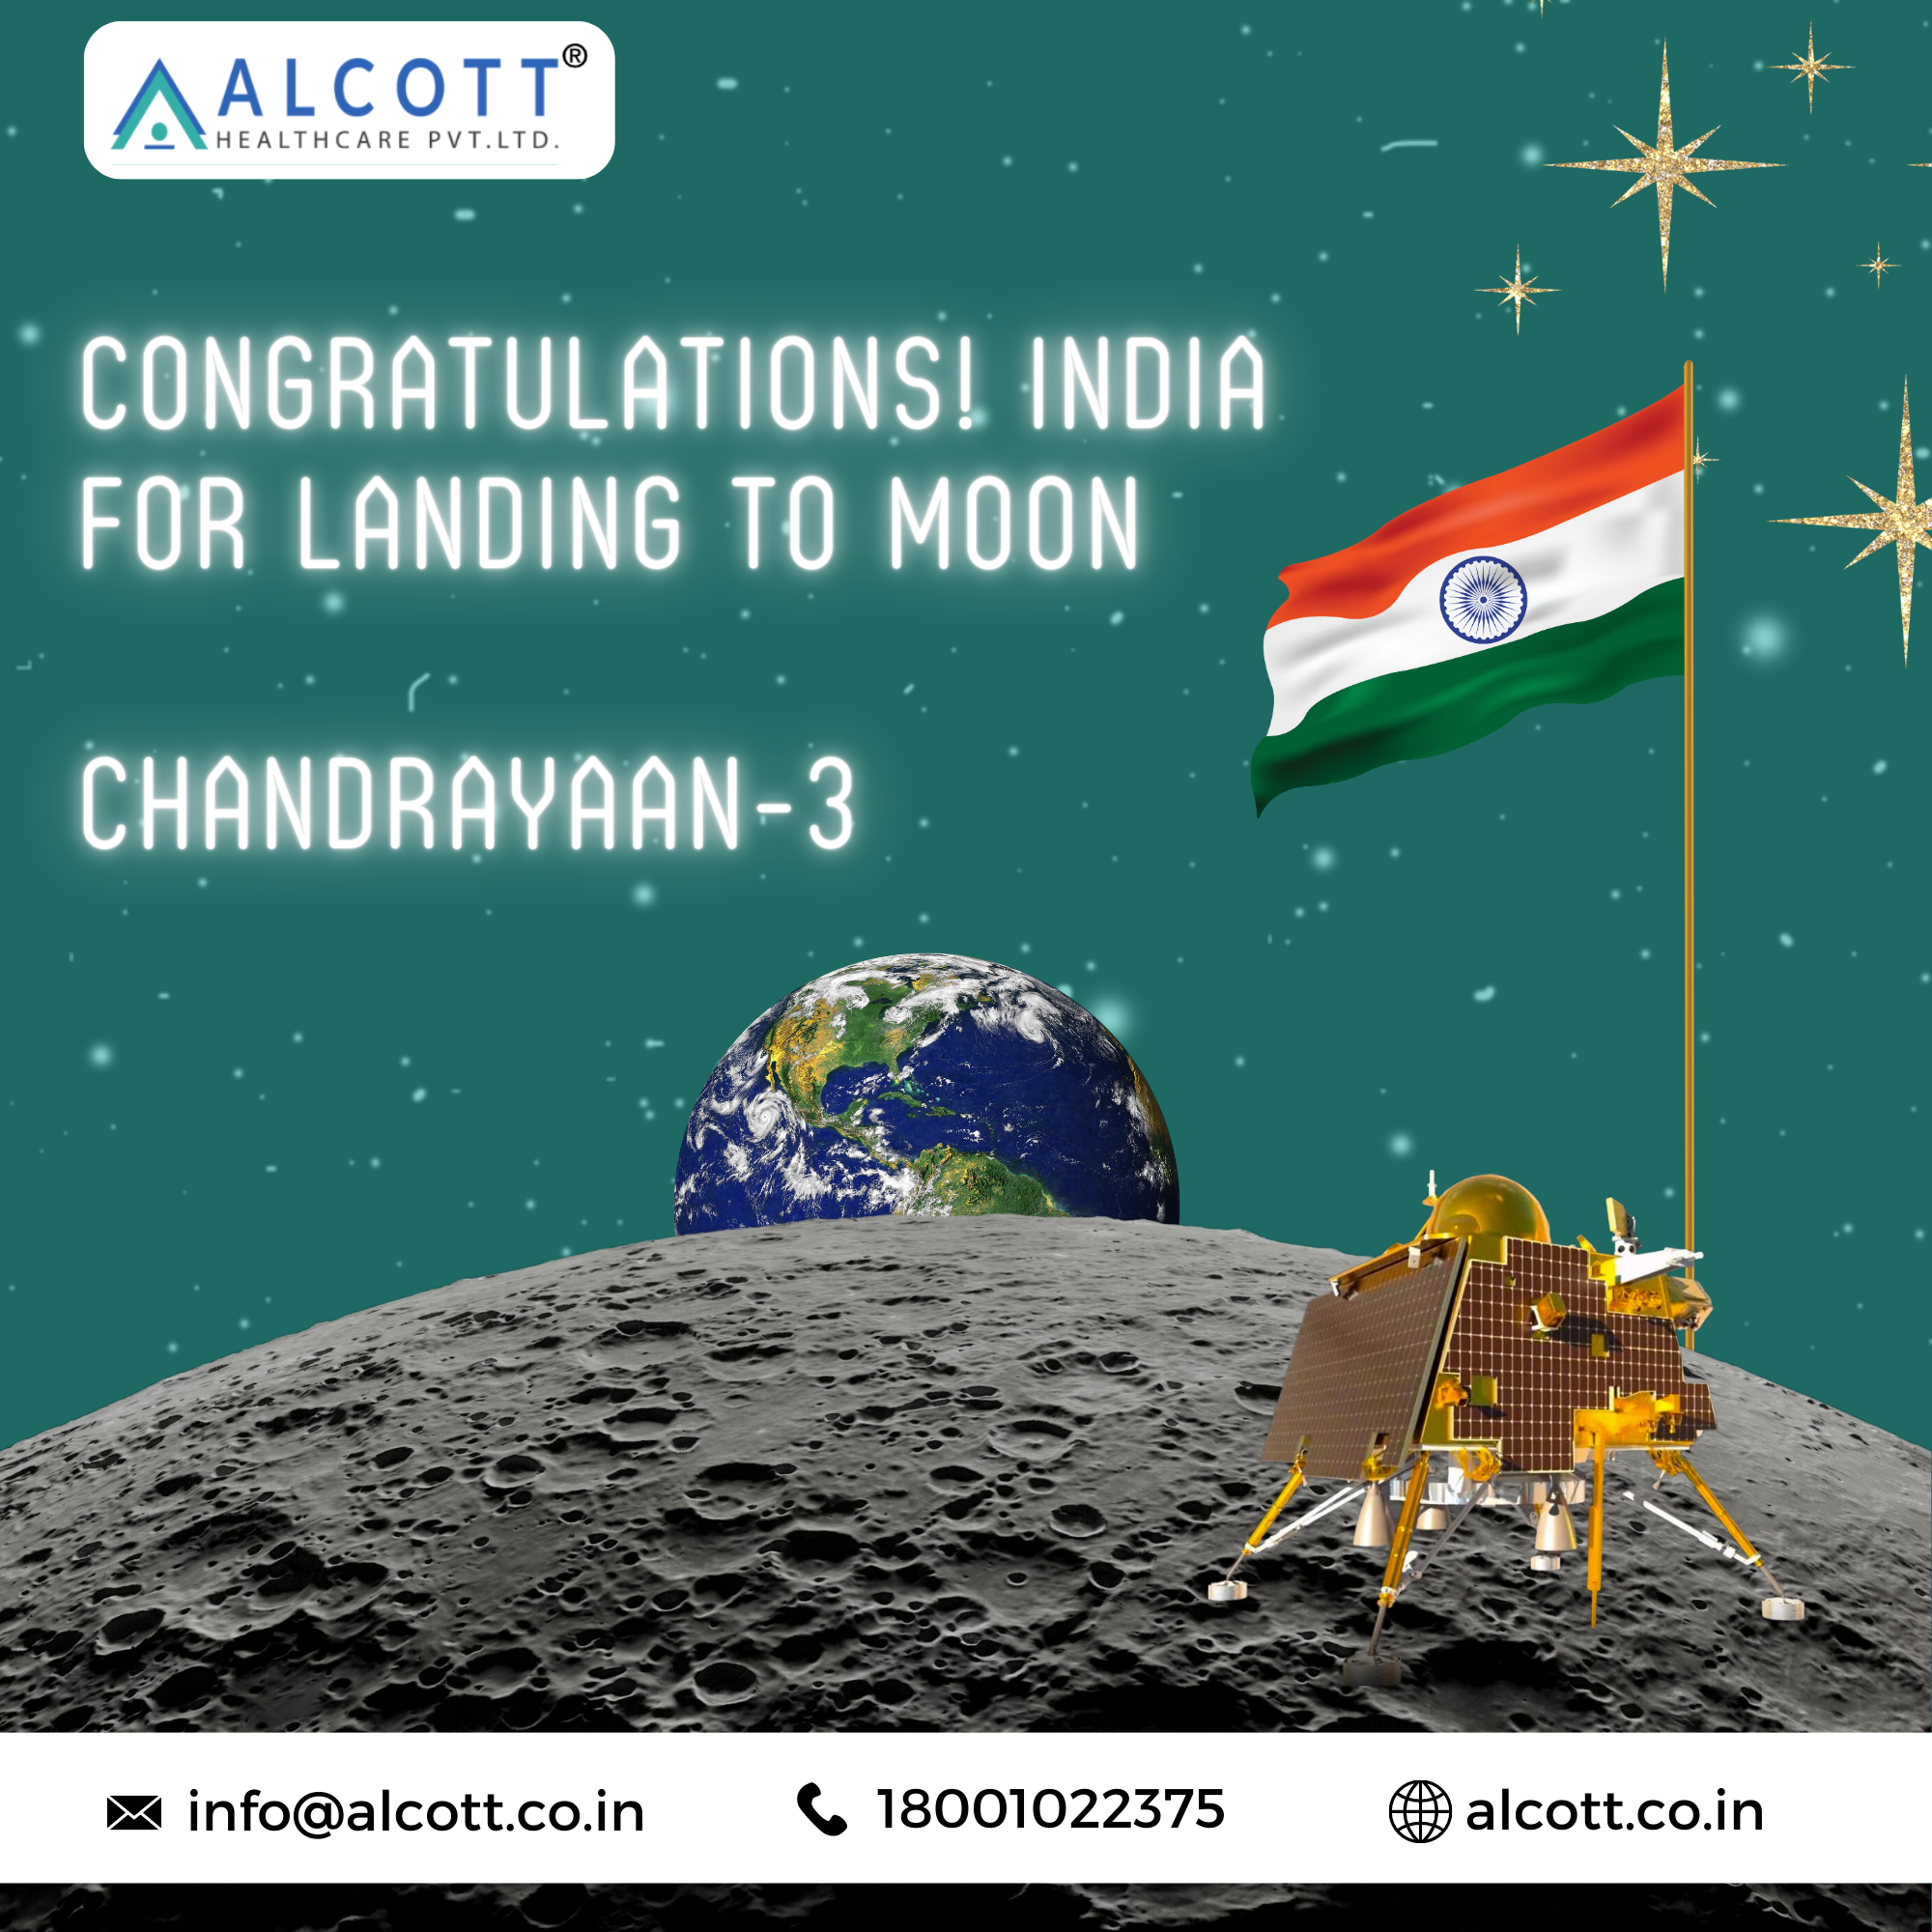 Chandrayaan 3: India’s Remarkable Achievement of a Soft Moon Landing